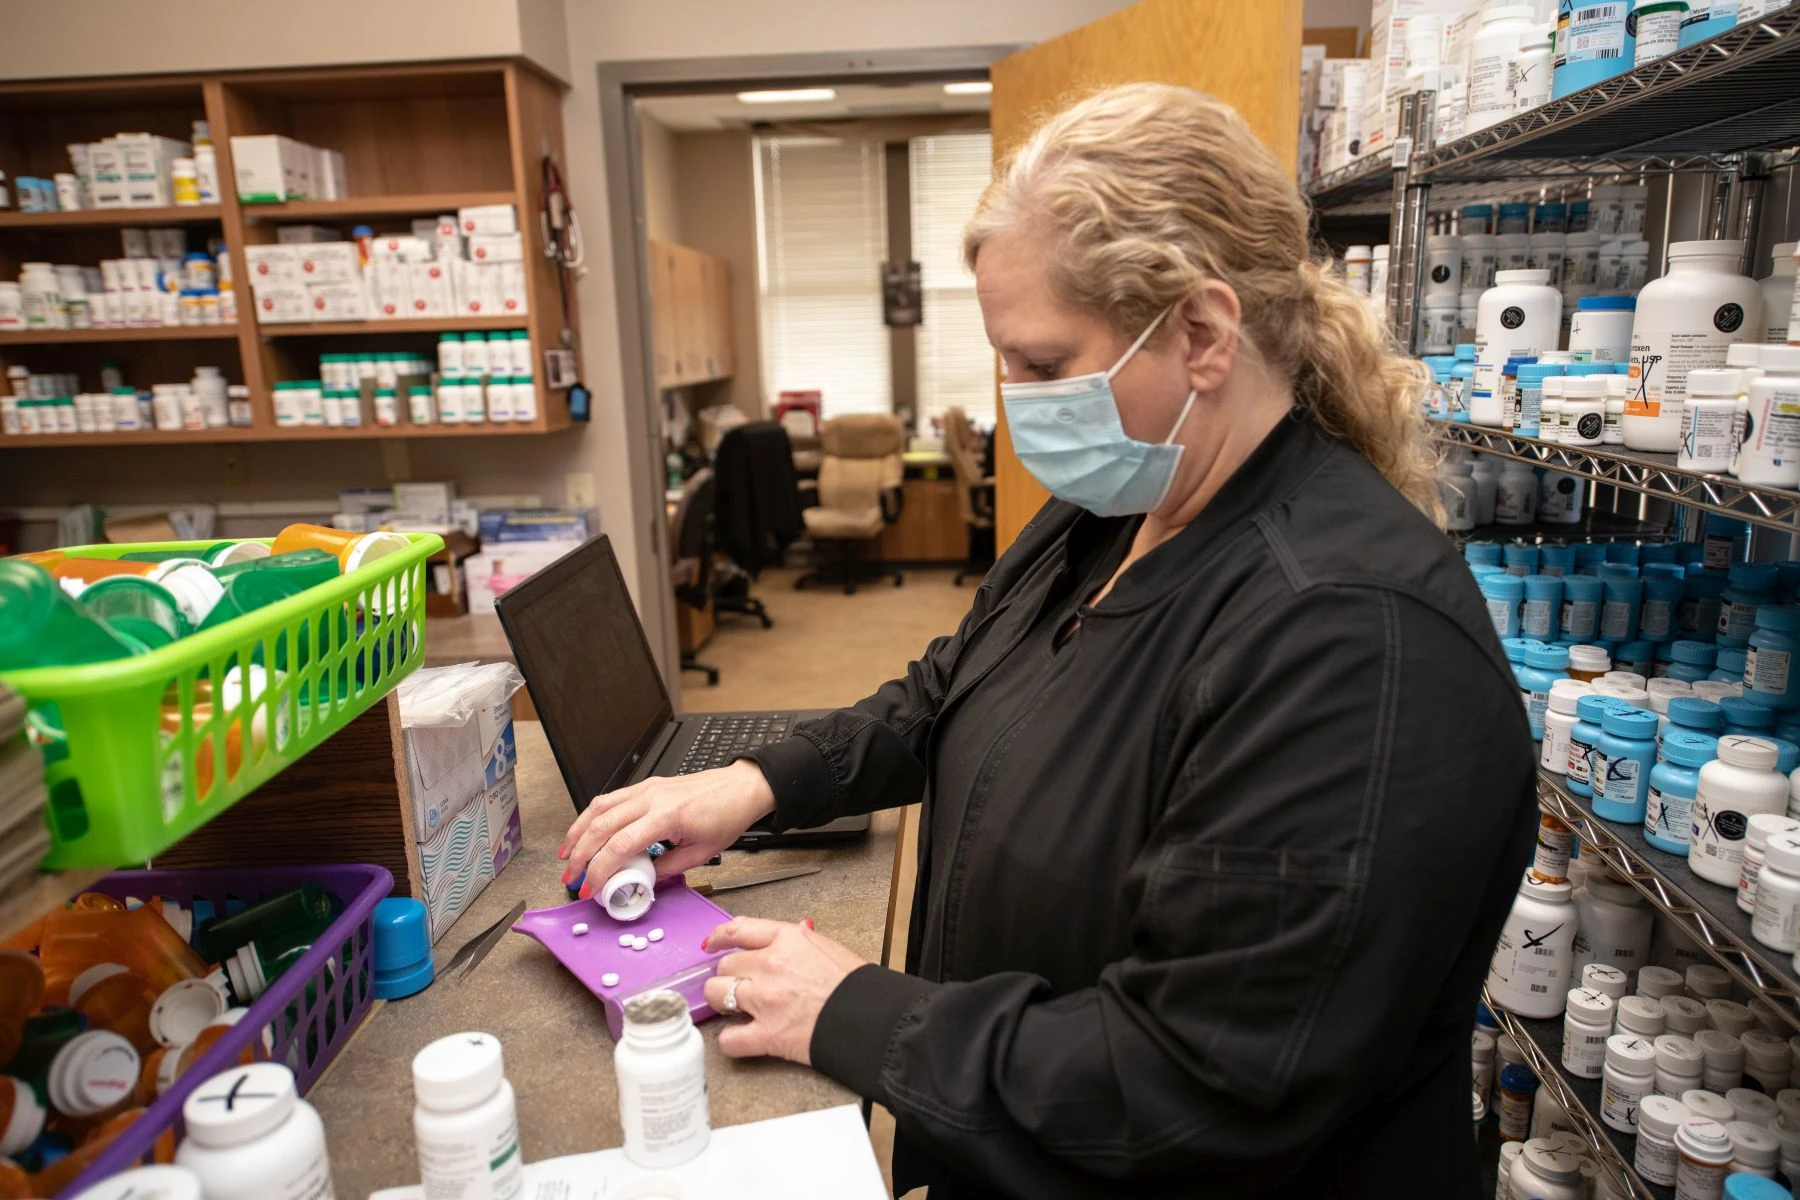 Pharmacist in black counting out pills next to a laptop computer with filled pharmacy shelves in the background